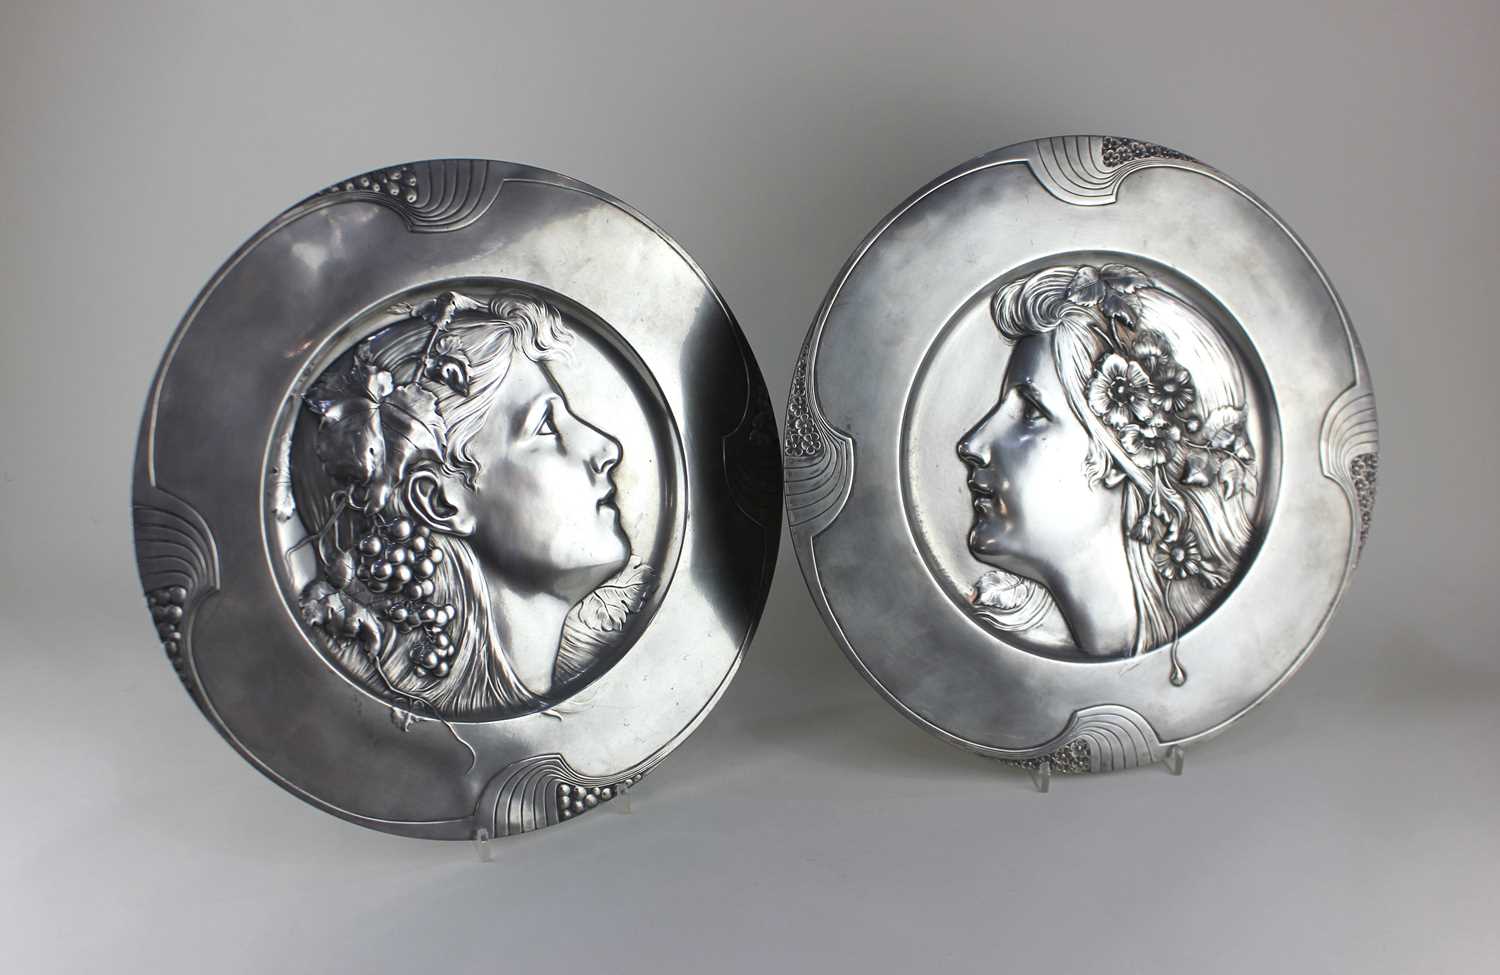 A pair of WMF Art Nouveau pewter plaques, numbered 294 & 294A, c.1900 / 1910, modelled in relief